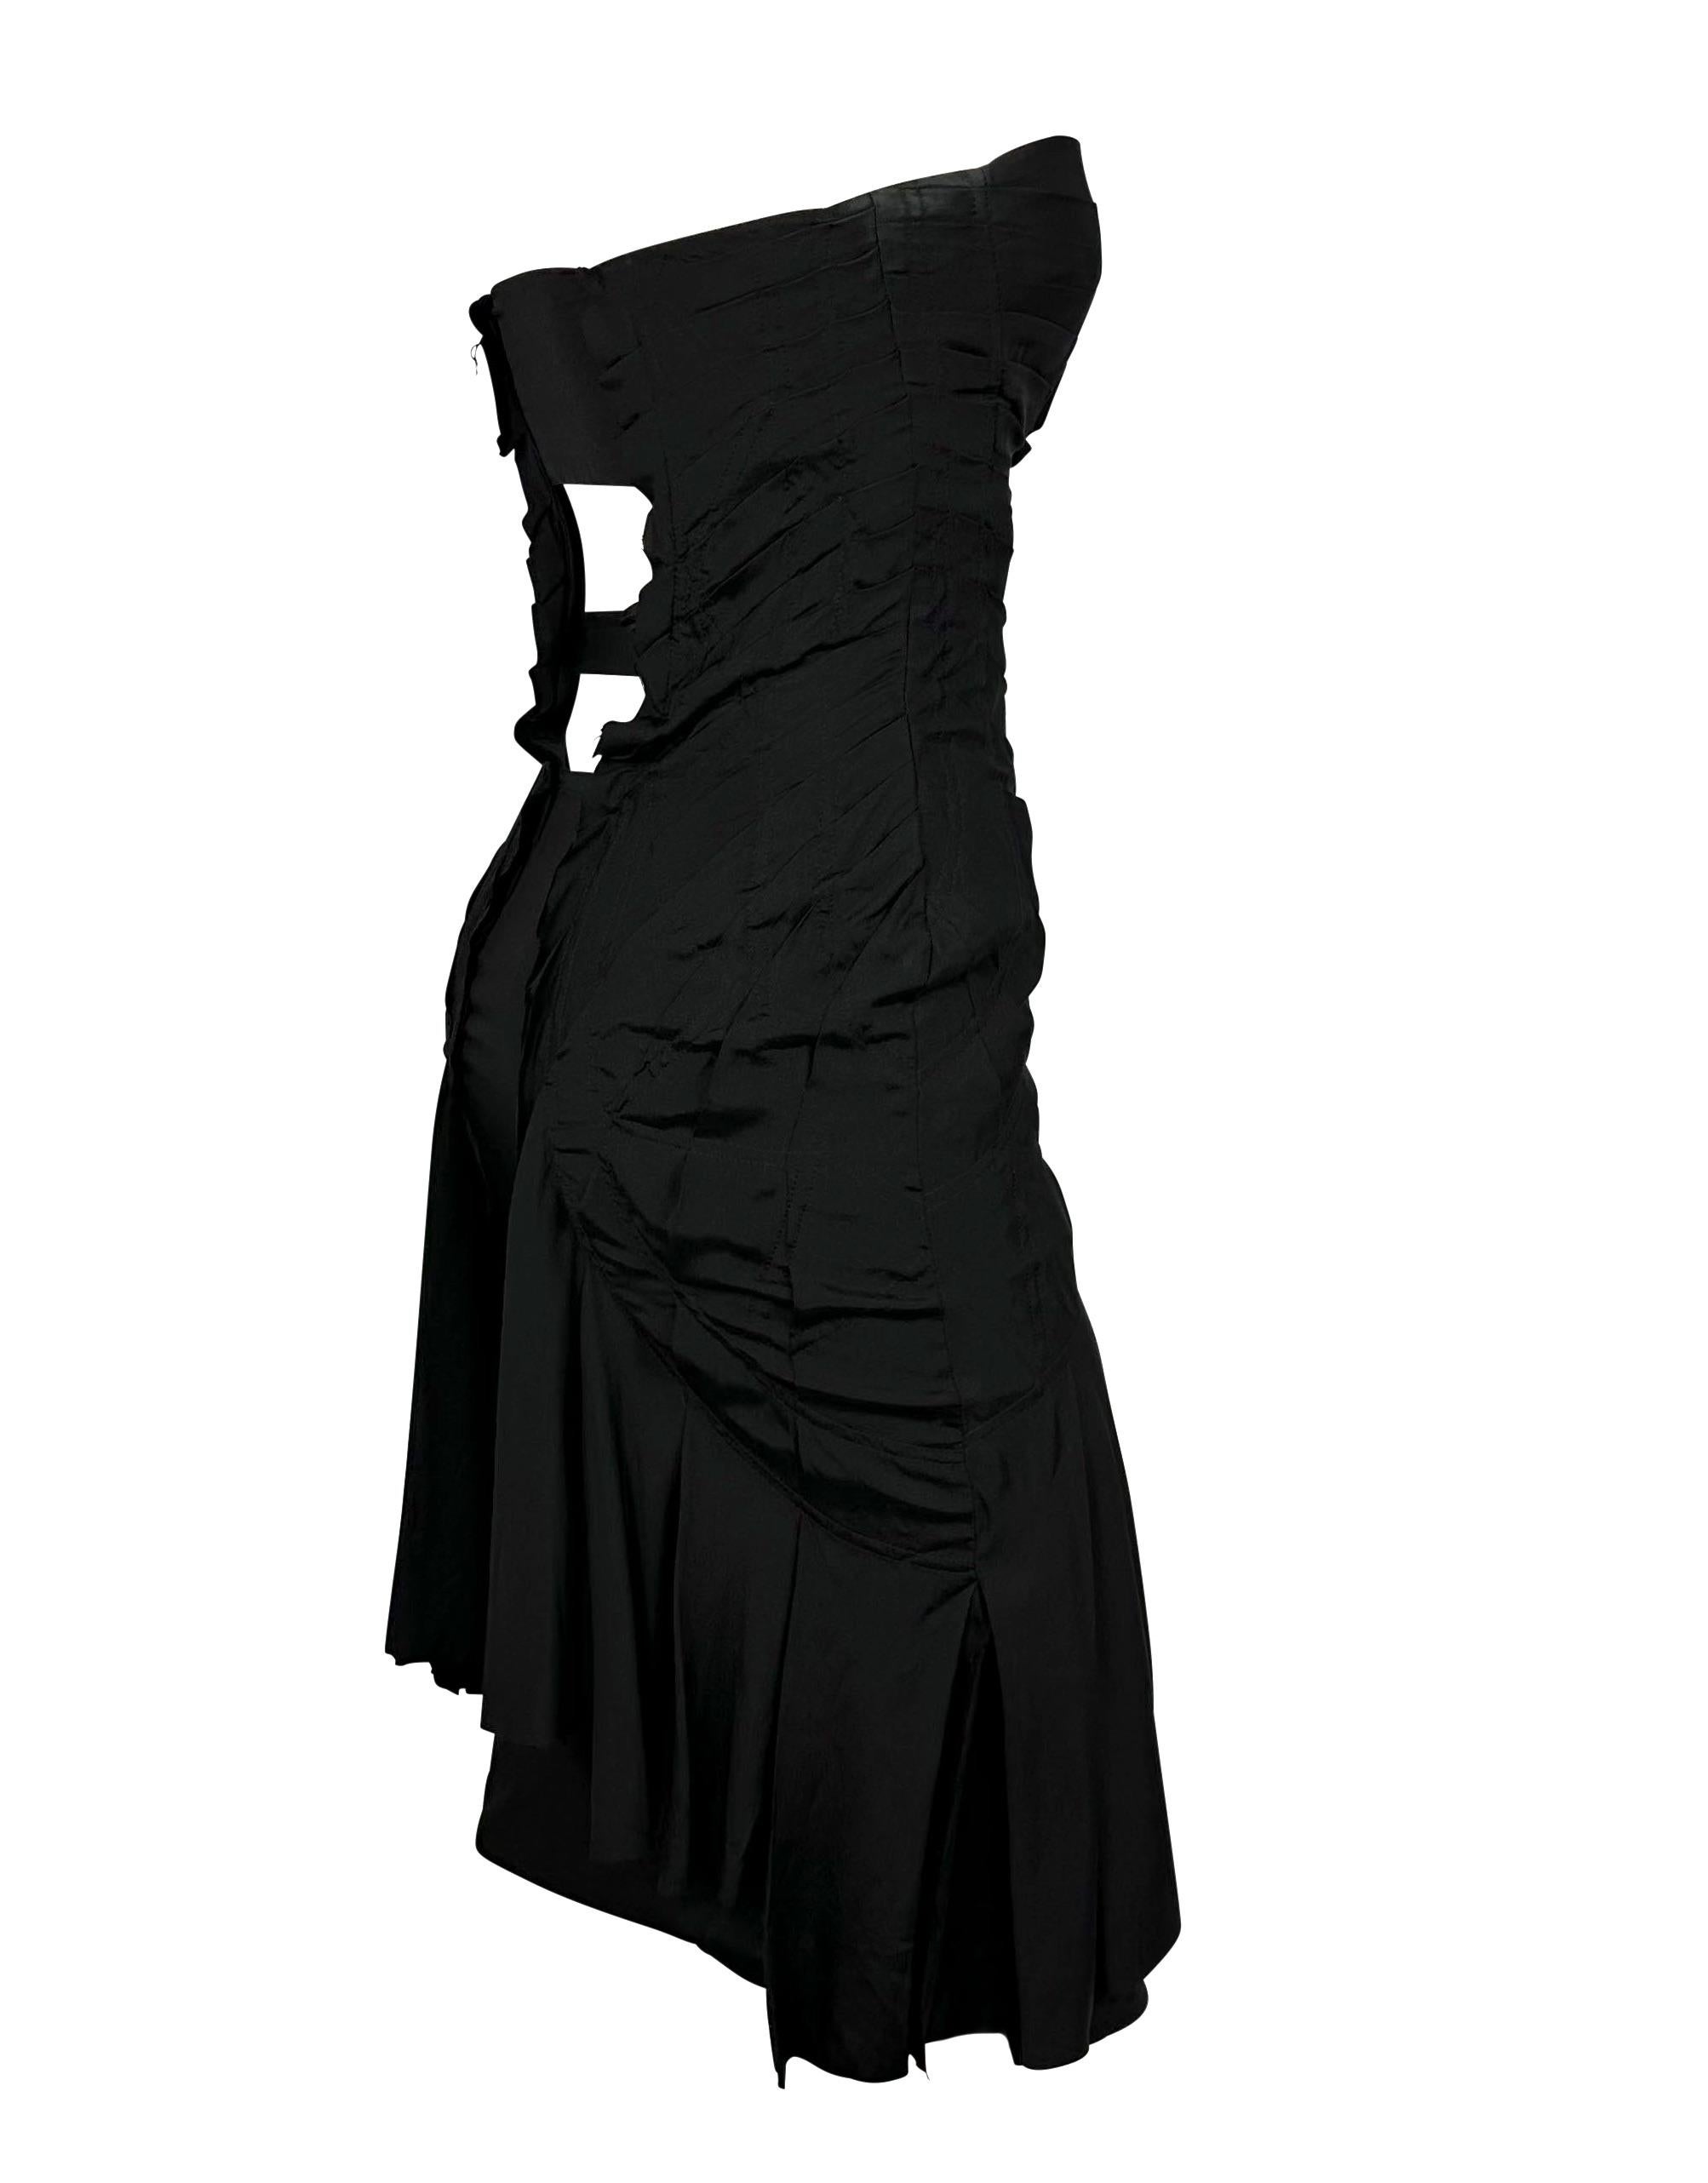 S/S 2004 Gucci by Tom Ford Fan Pleated Silk Ribbon Cutout Black Strapless Dress For Sale 2